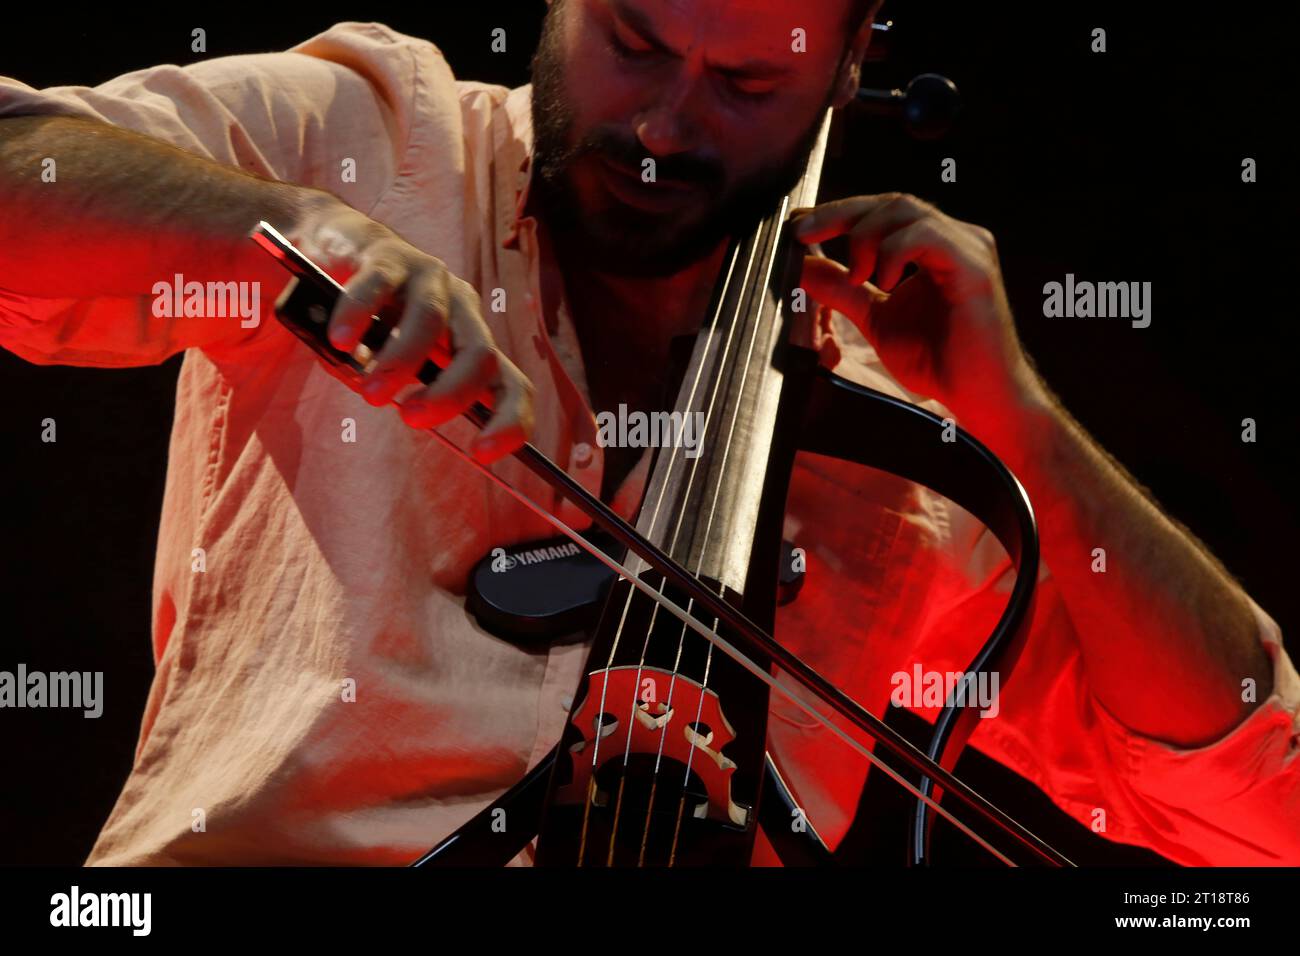 October 11, 2023, Madrid, Madrid, Spain: The Croatian cellist, Stjepan Hauser (Pula, 1986), known artistically as Hauser, is seen on stage during a concert of his first solo world tour 'Rebel with a cello', at the WiZink Center, in Madrid (Spain). Stjepan Hauser, founding member of the duo 2Cellos arrives in Spain with his first solo show, 'Rebel with a cello'. As in the 2Cellos concerts, the new show includes innovative sound, lighting and image effects, and careful staging, with Hauser at the center of the stage accompanied by an orchestra of string, wind and percussion instruments. On this Stock Photo